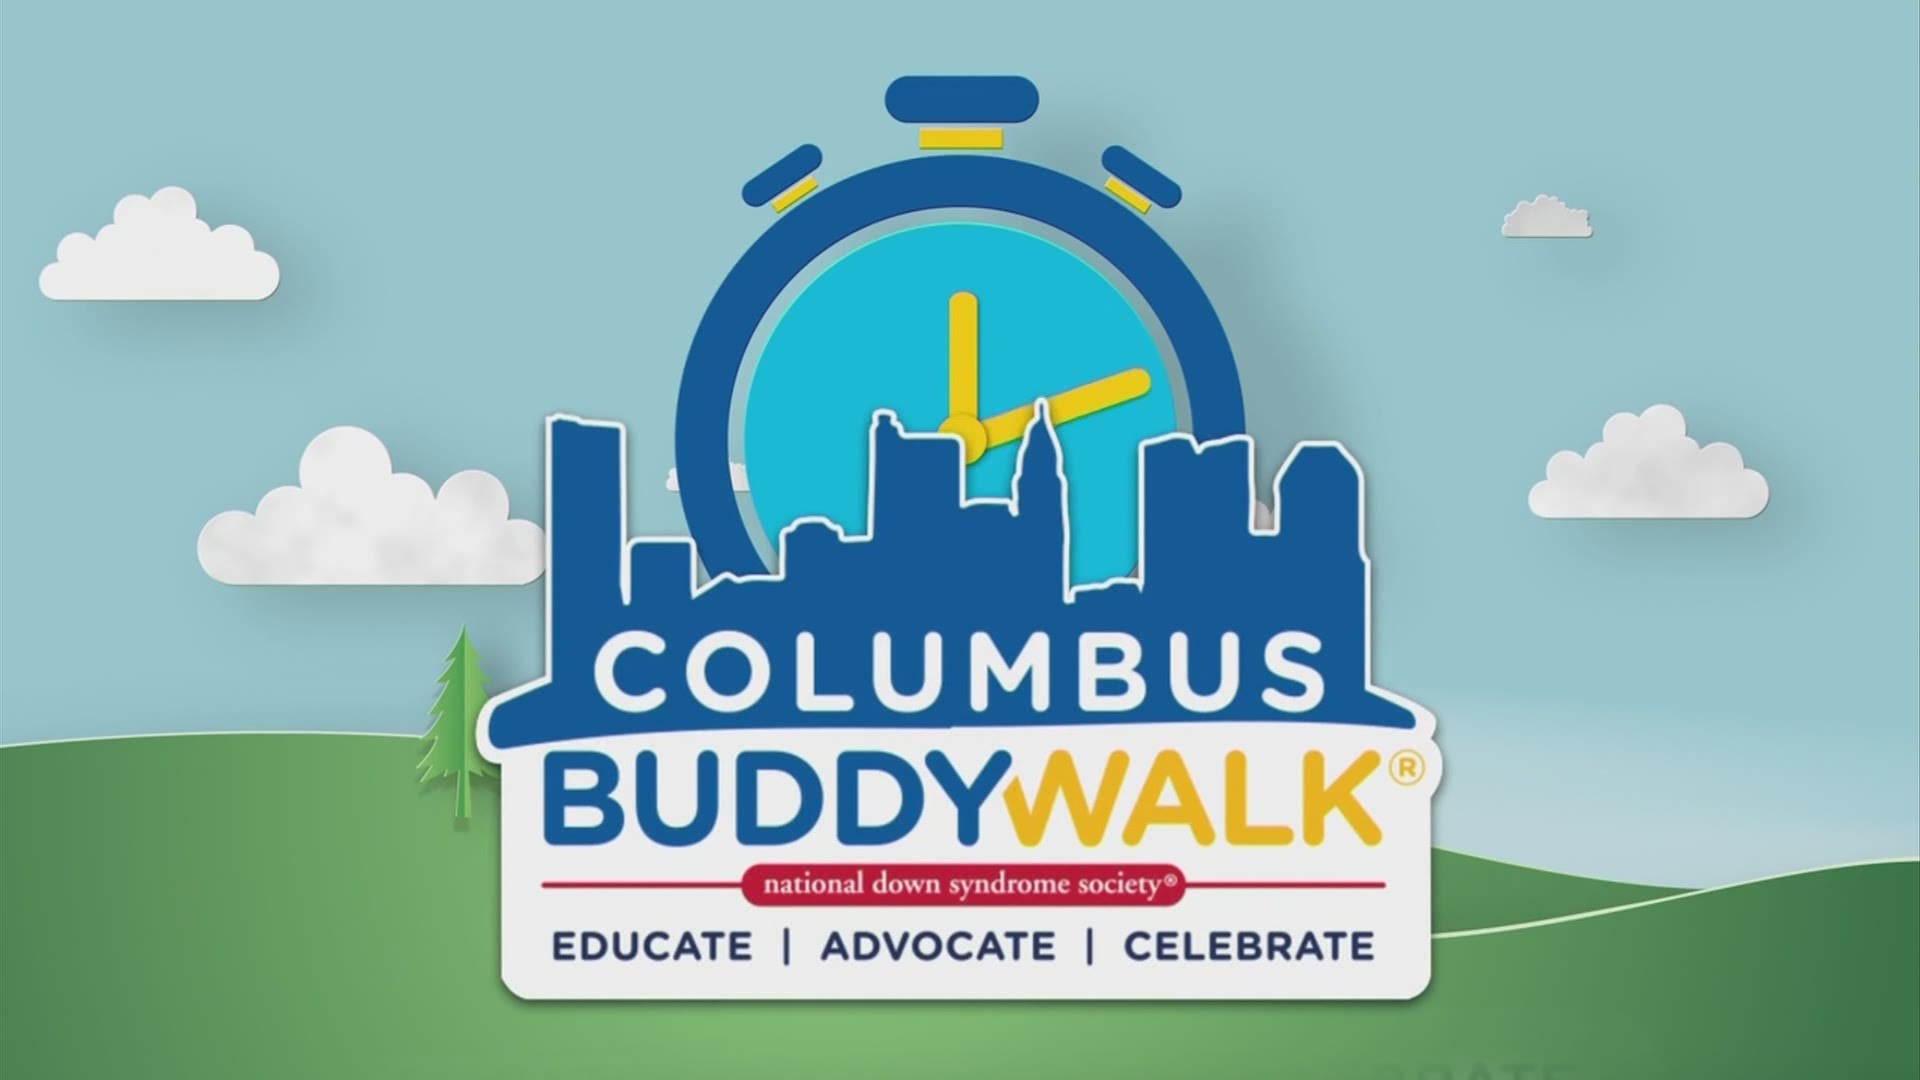 Like everything else in 2020, the Columbus Buddy Walk is going to look a lot different this year.